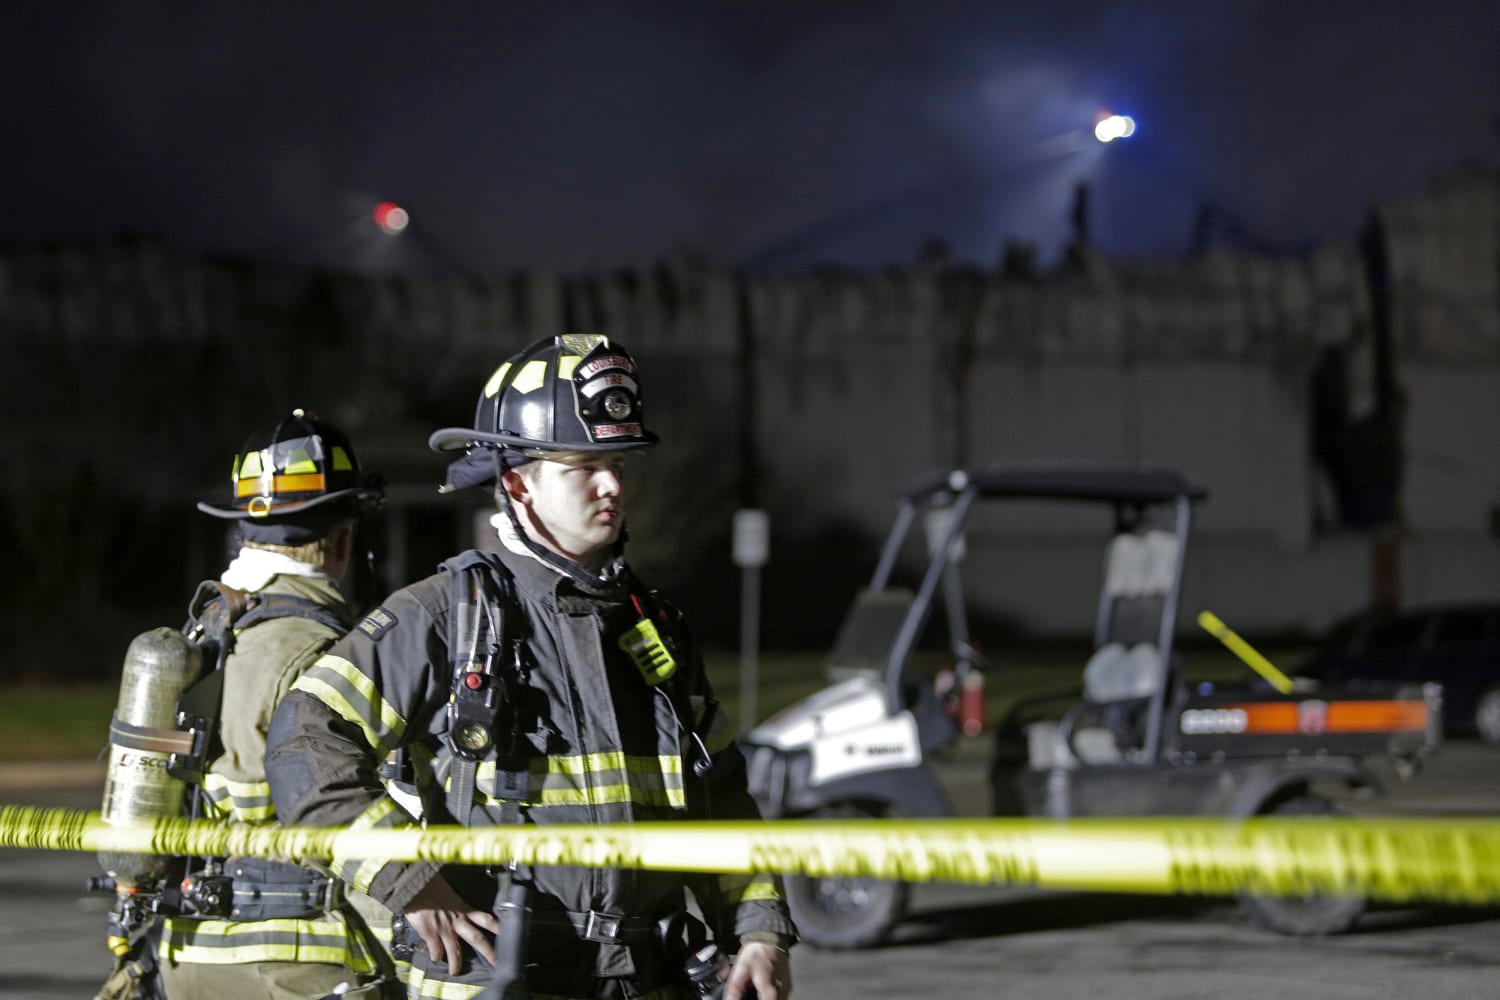 Body found in QVC facility after five-alarm fire